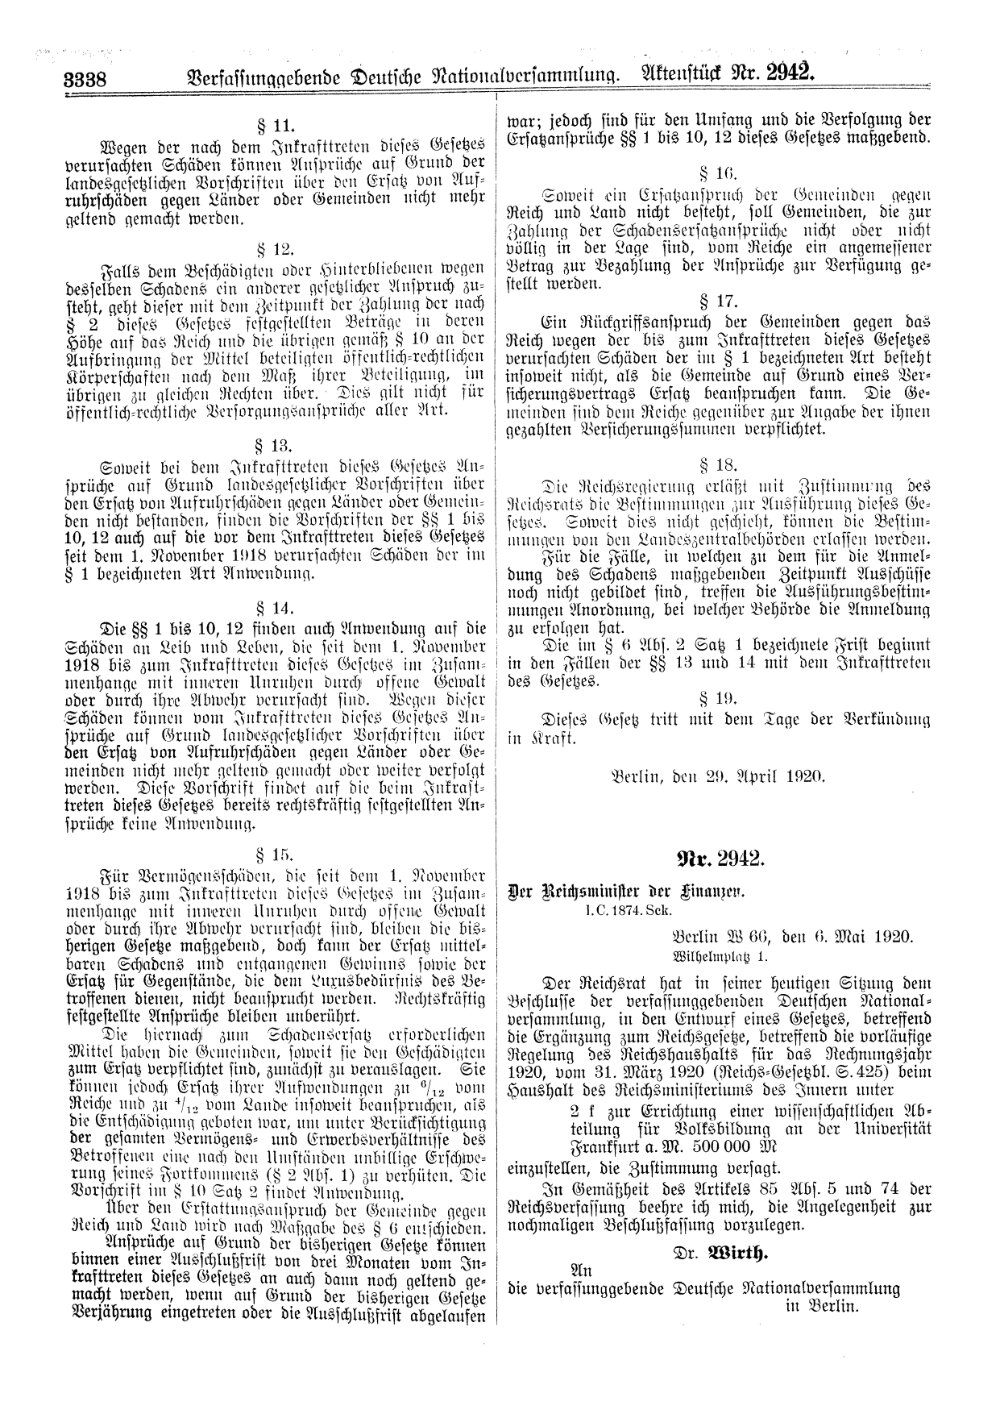 Scan of page 3338